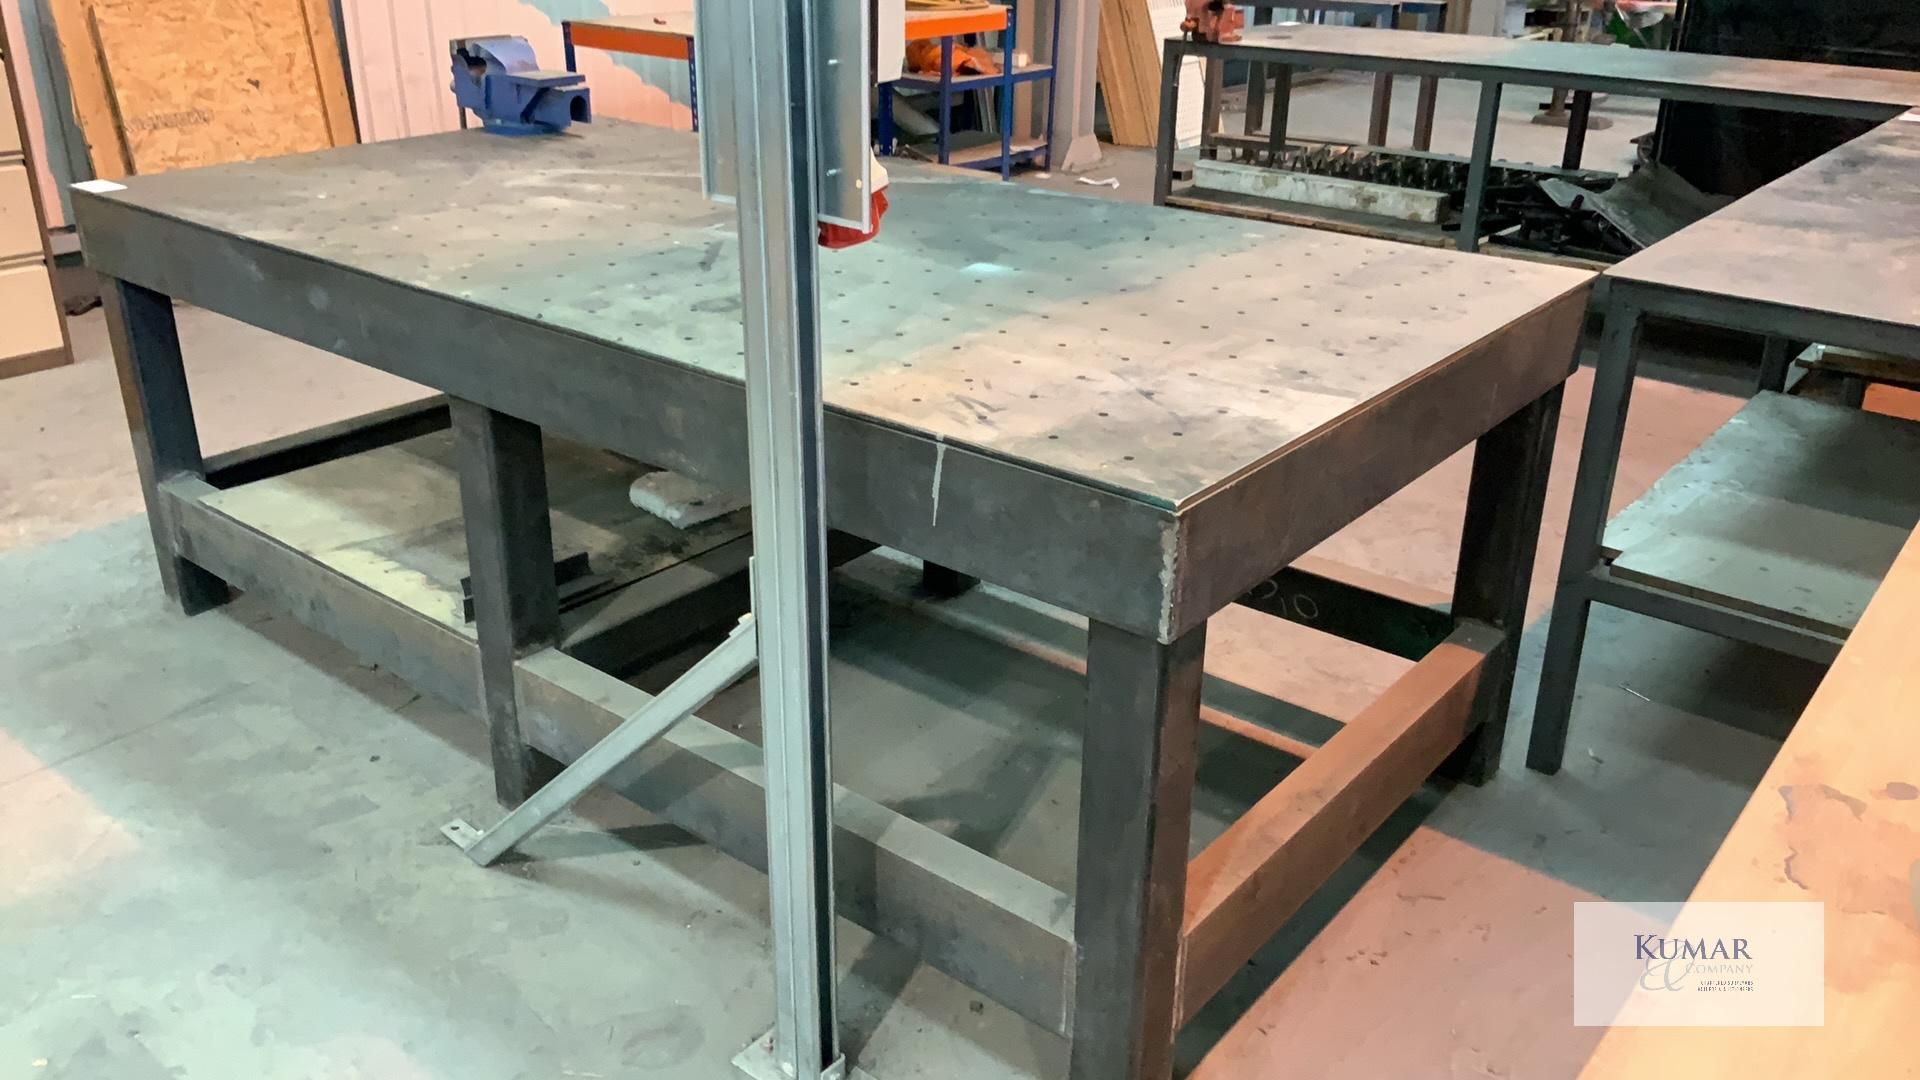 Specialist Welding Table with Bench Vice - Dimensions 250cm x 126cm x90cm Height - Please Note - Image 5 of 7